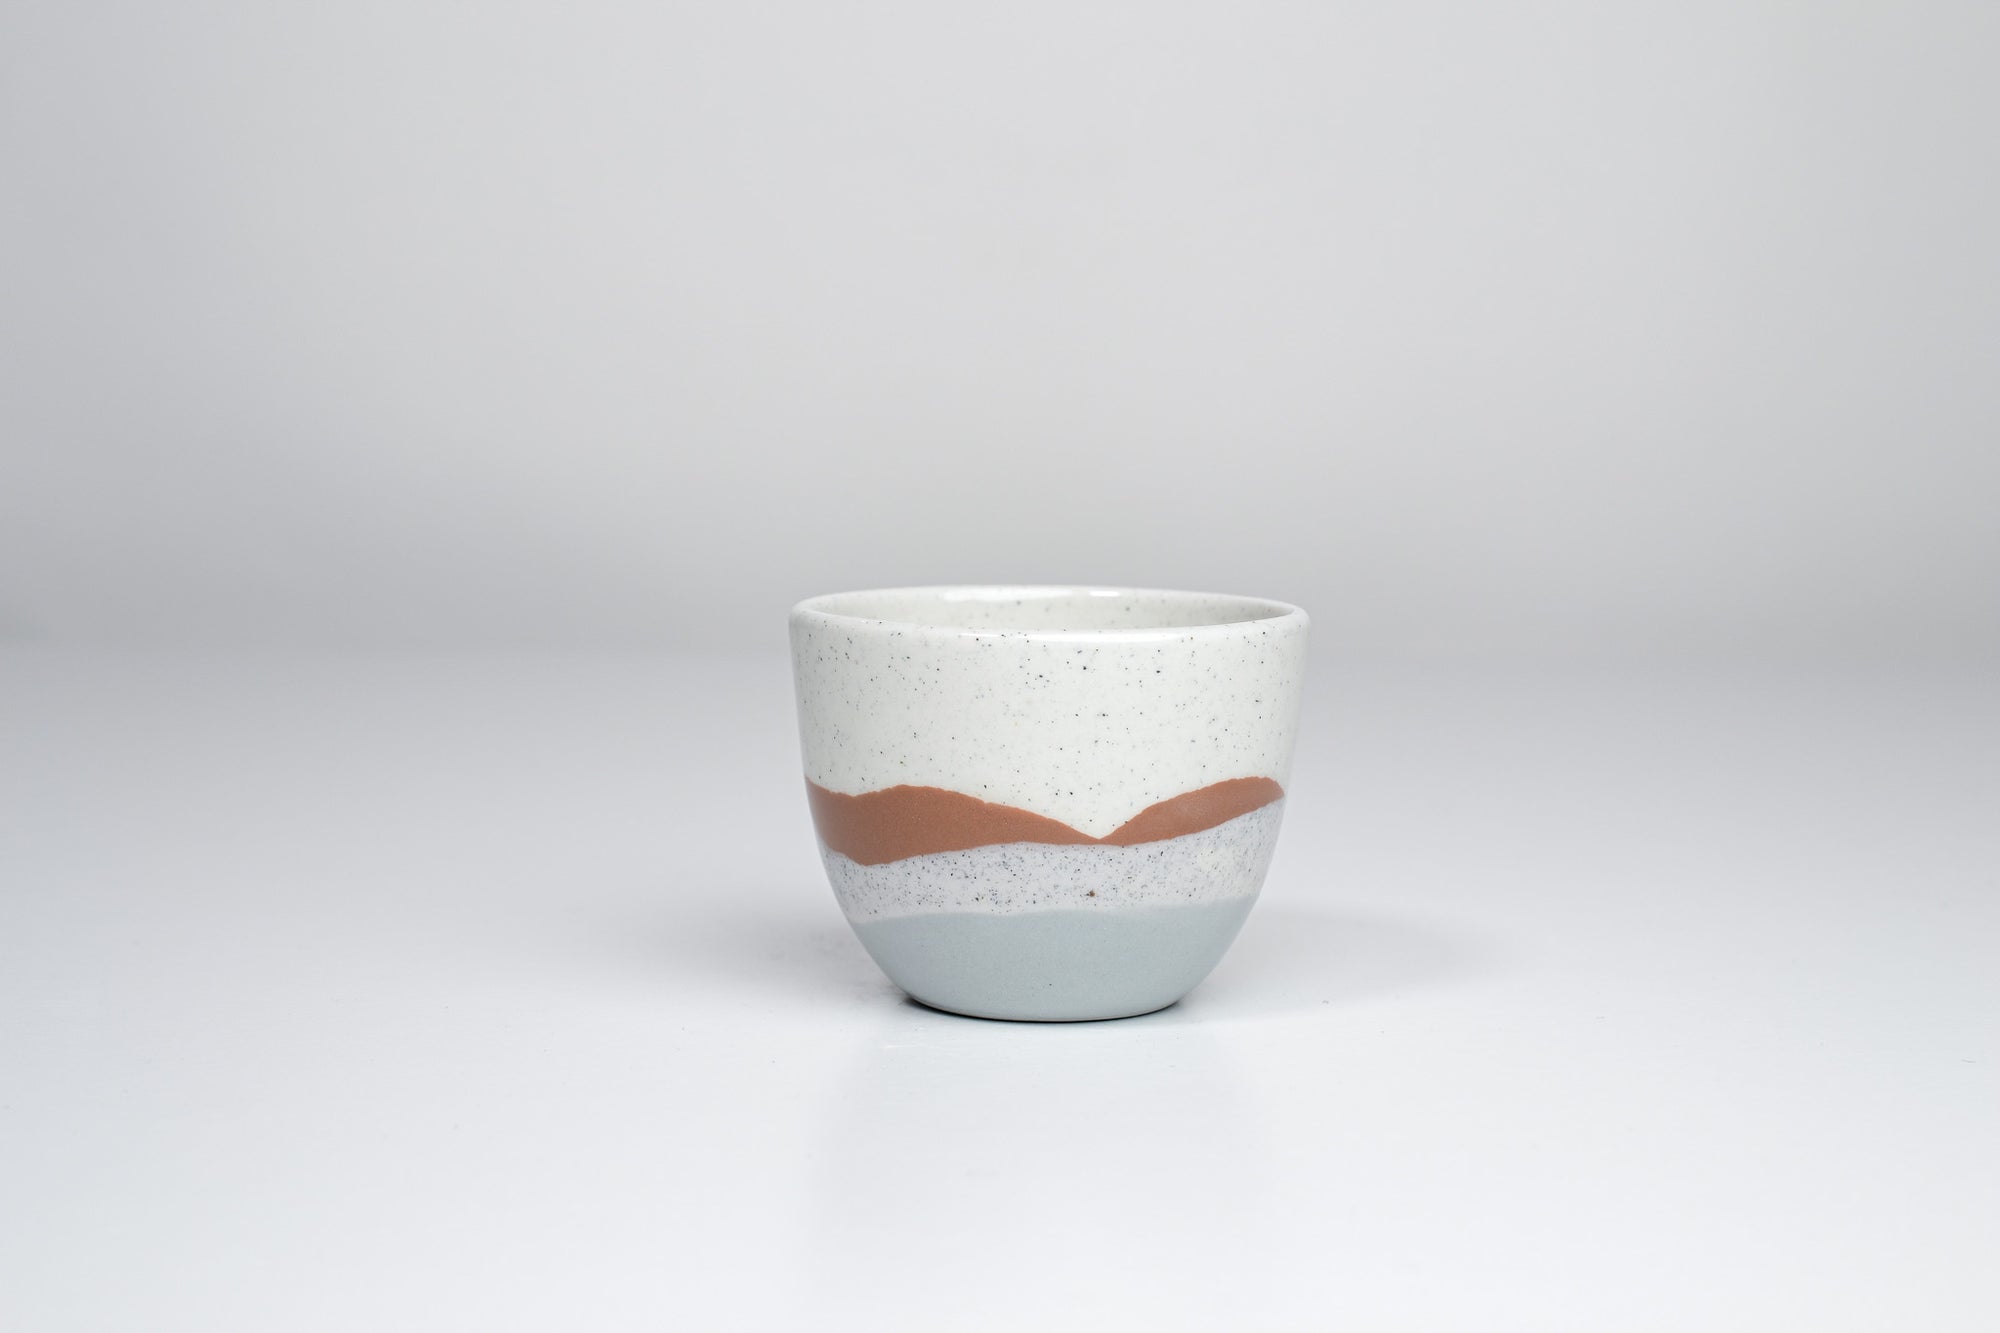 Simple cup, winter vibes with Odoiro